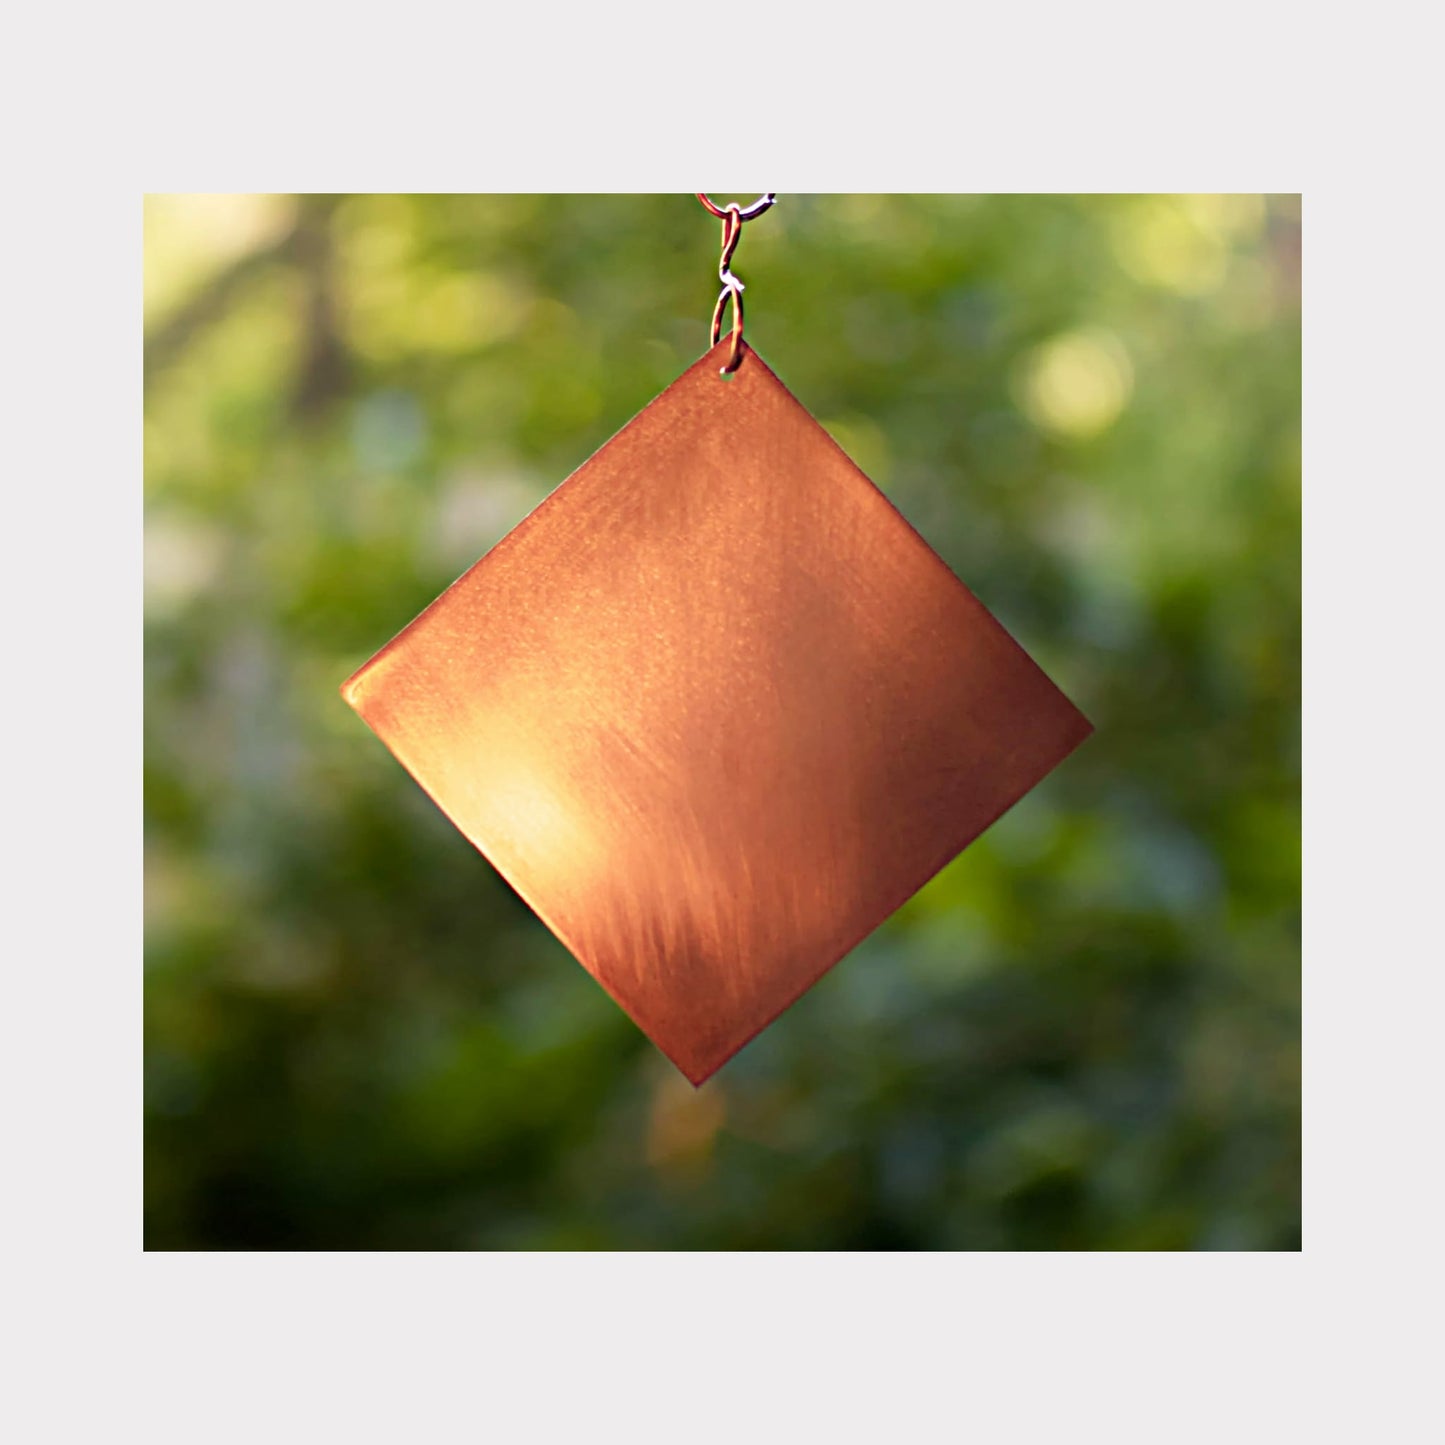 handmade copper windsail for a wind chime, by Coast Chimes